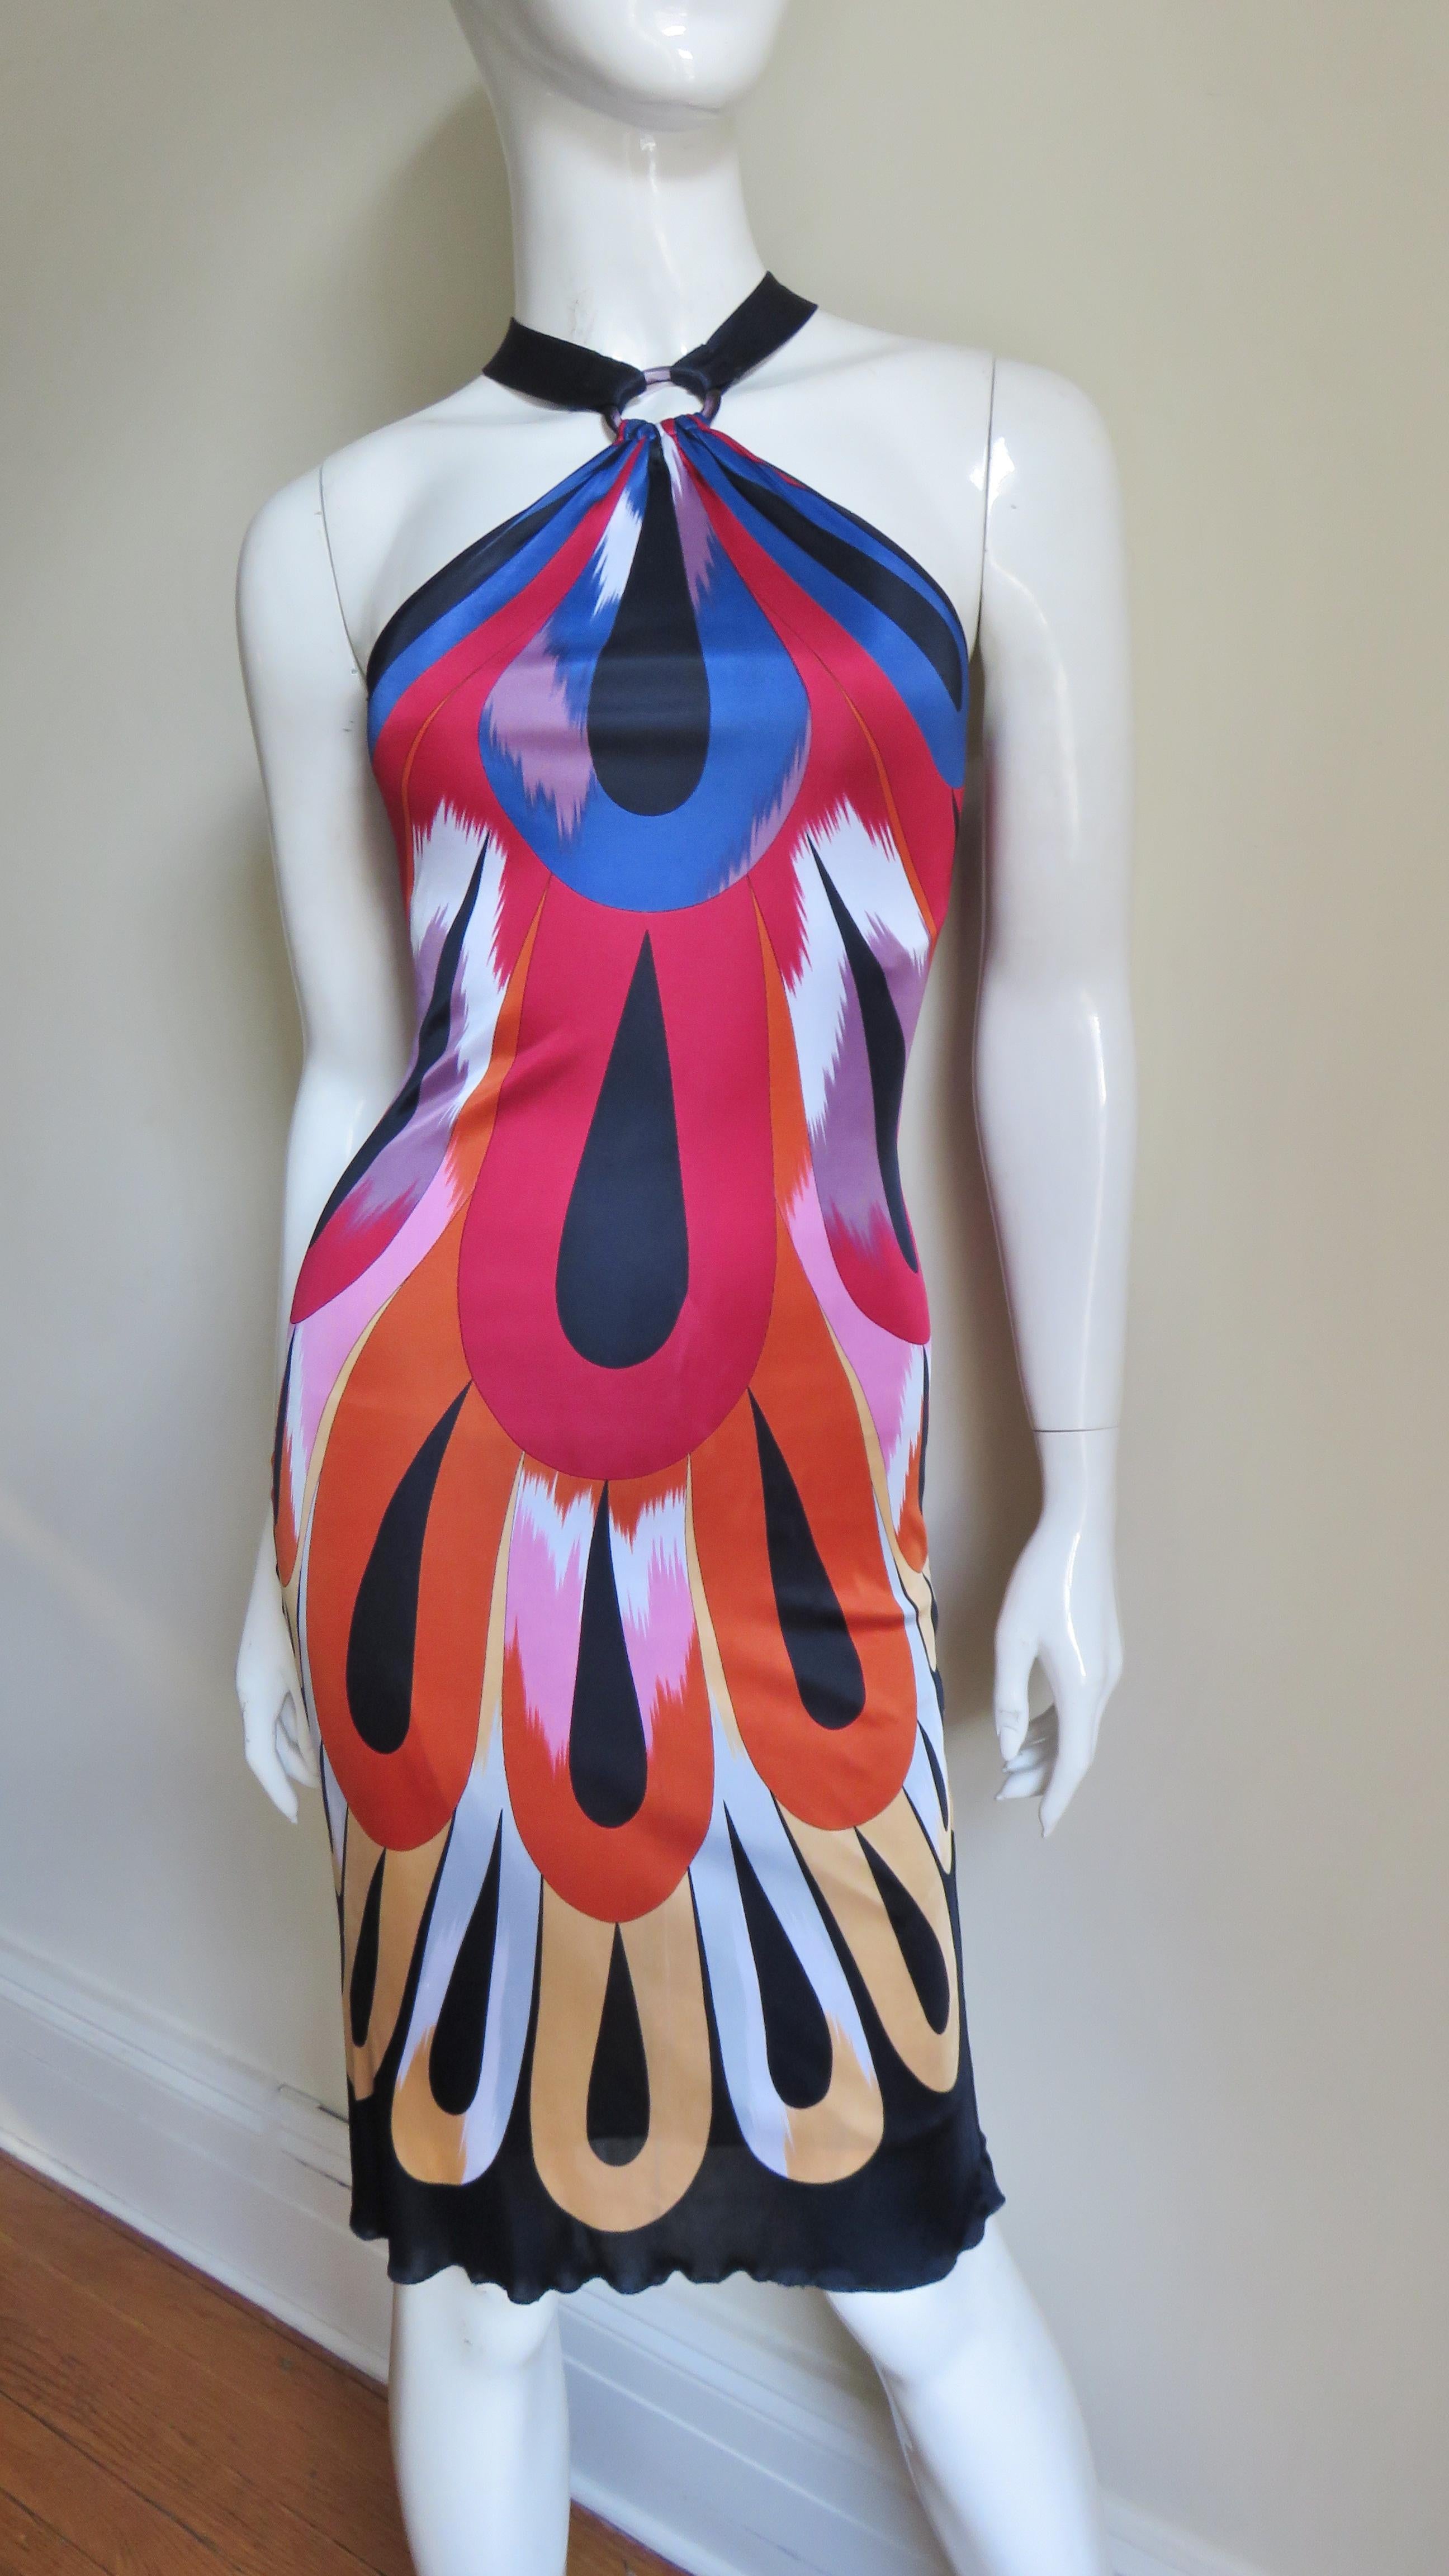 Missoni Colorful Silk Halter Dress In Good Condition For Sale In Water Mill, NY